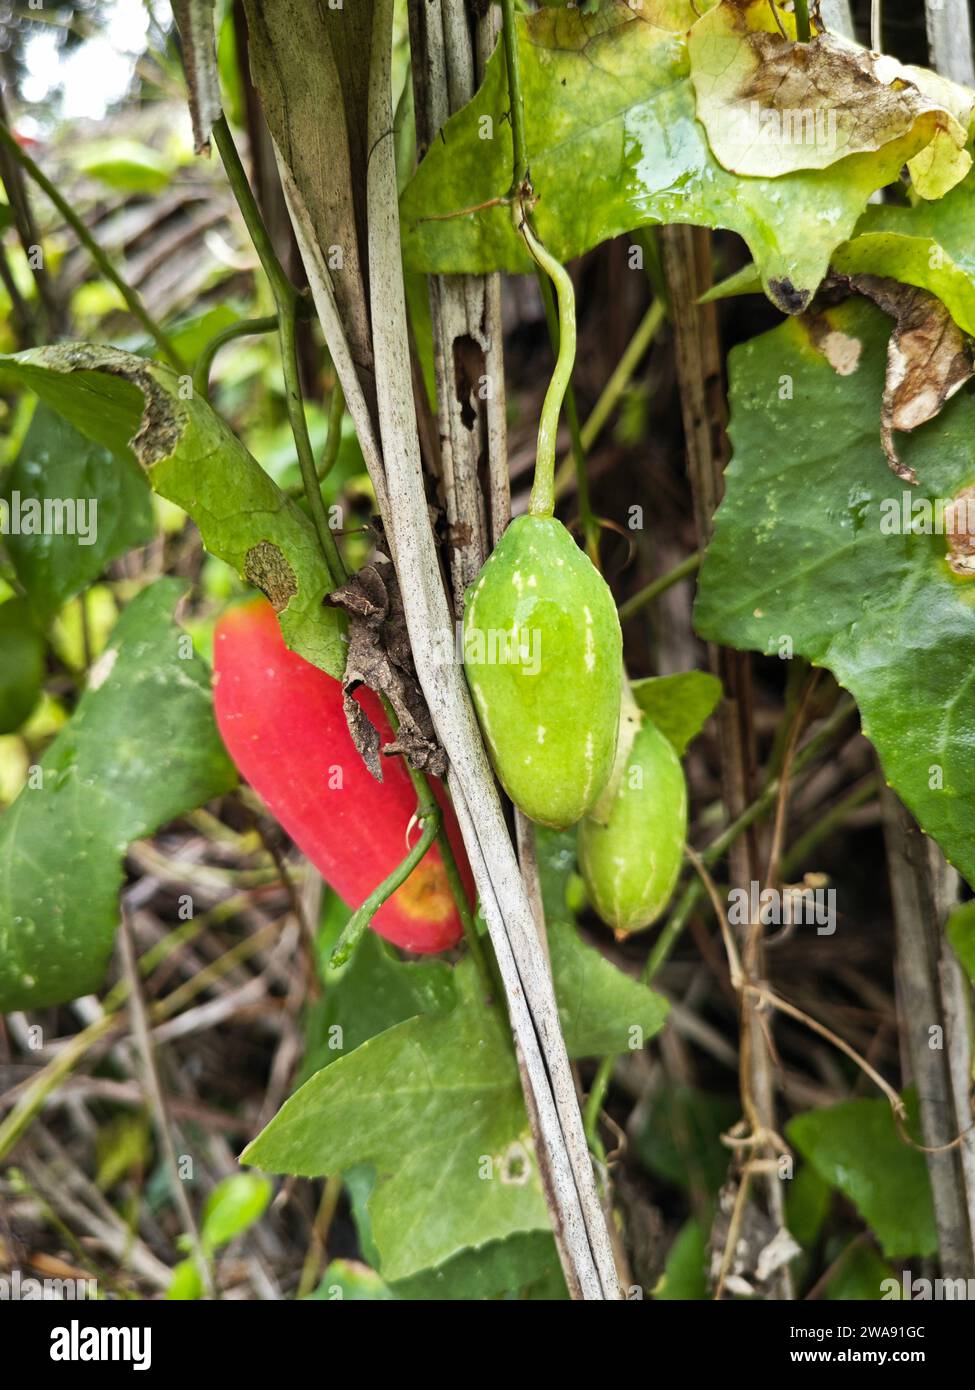 the creeping ivy gourd fruits plant climbing around the wild bushes Stock Photo